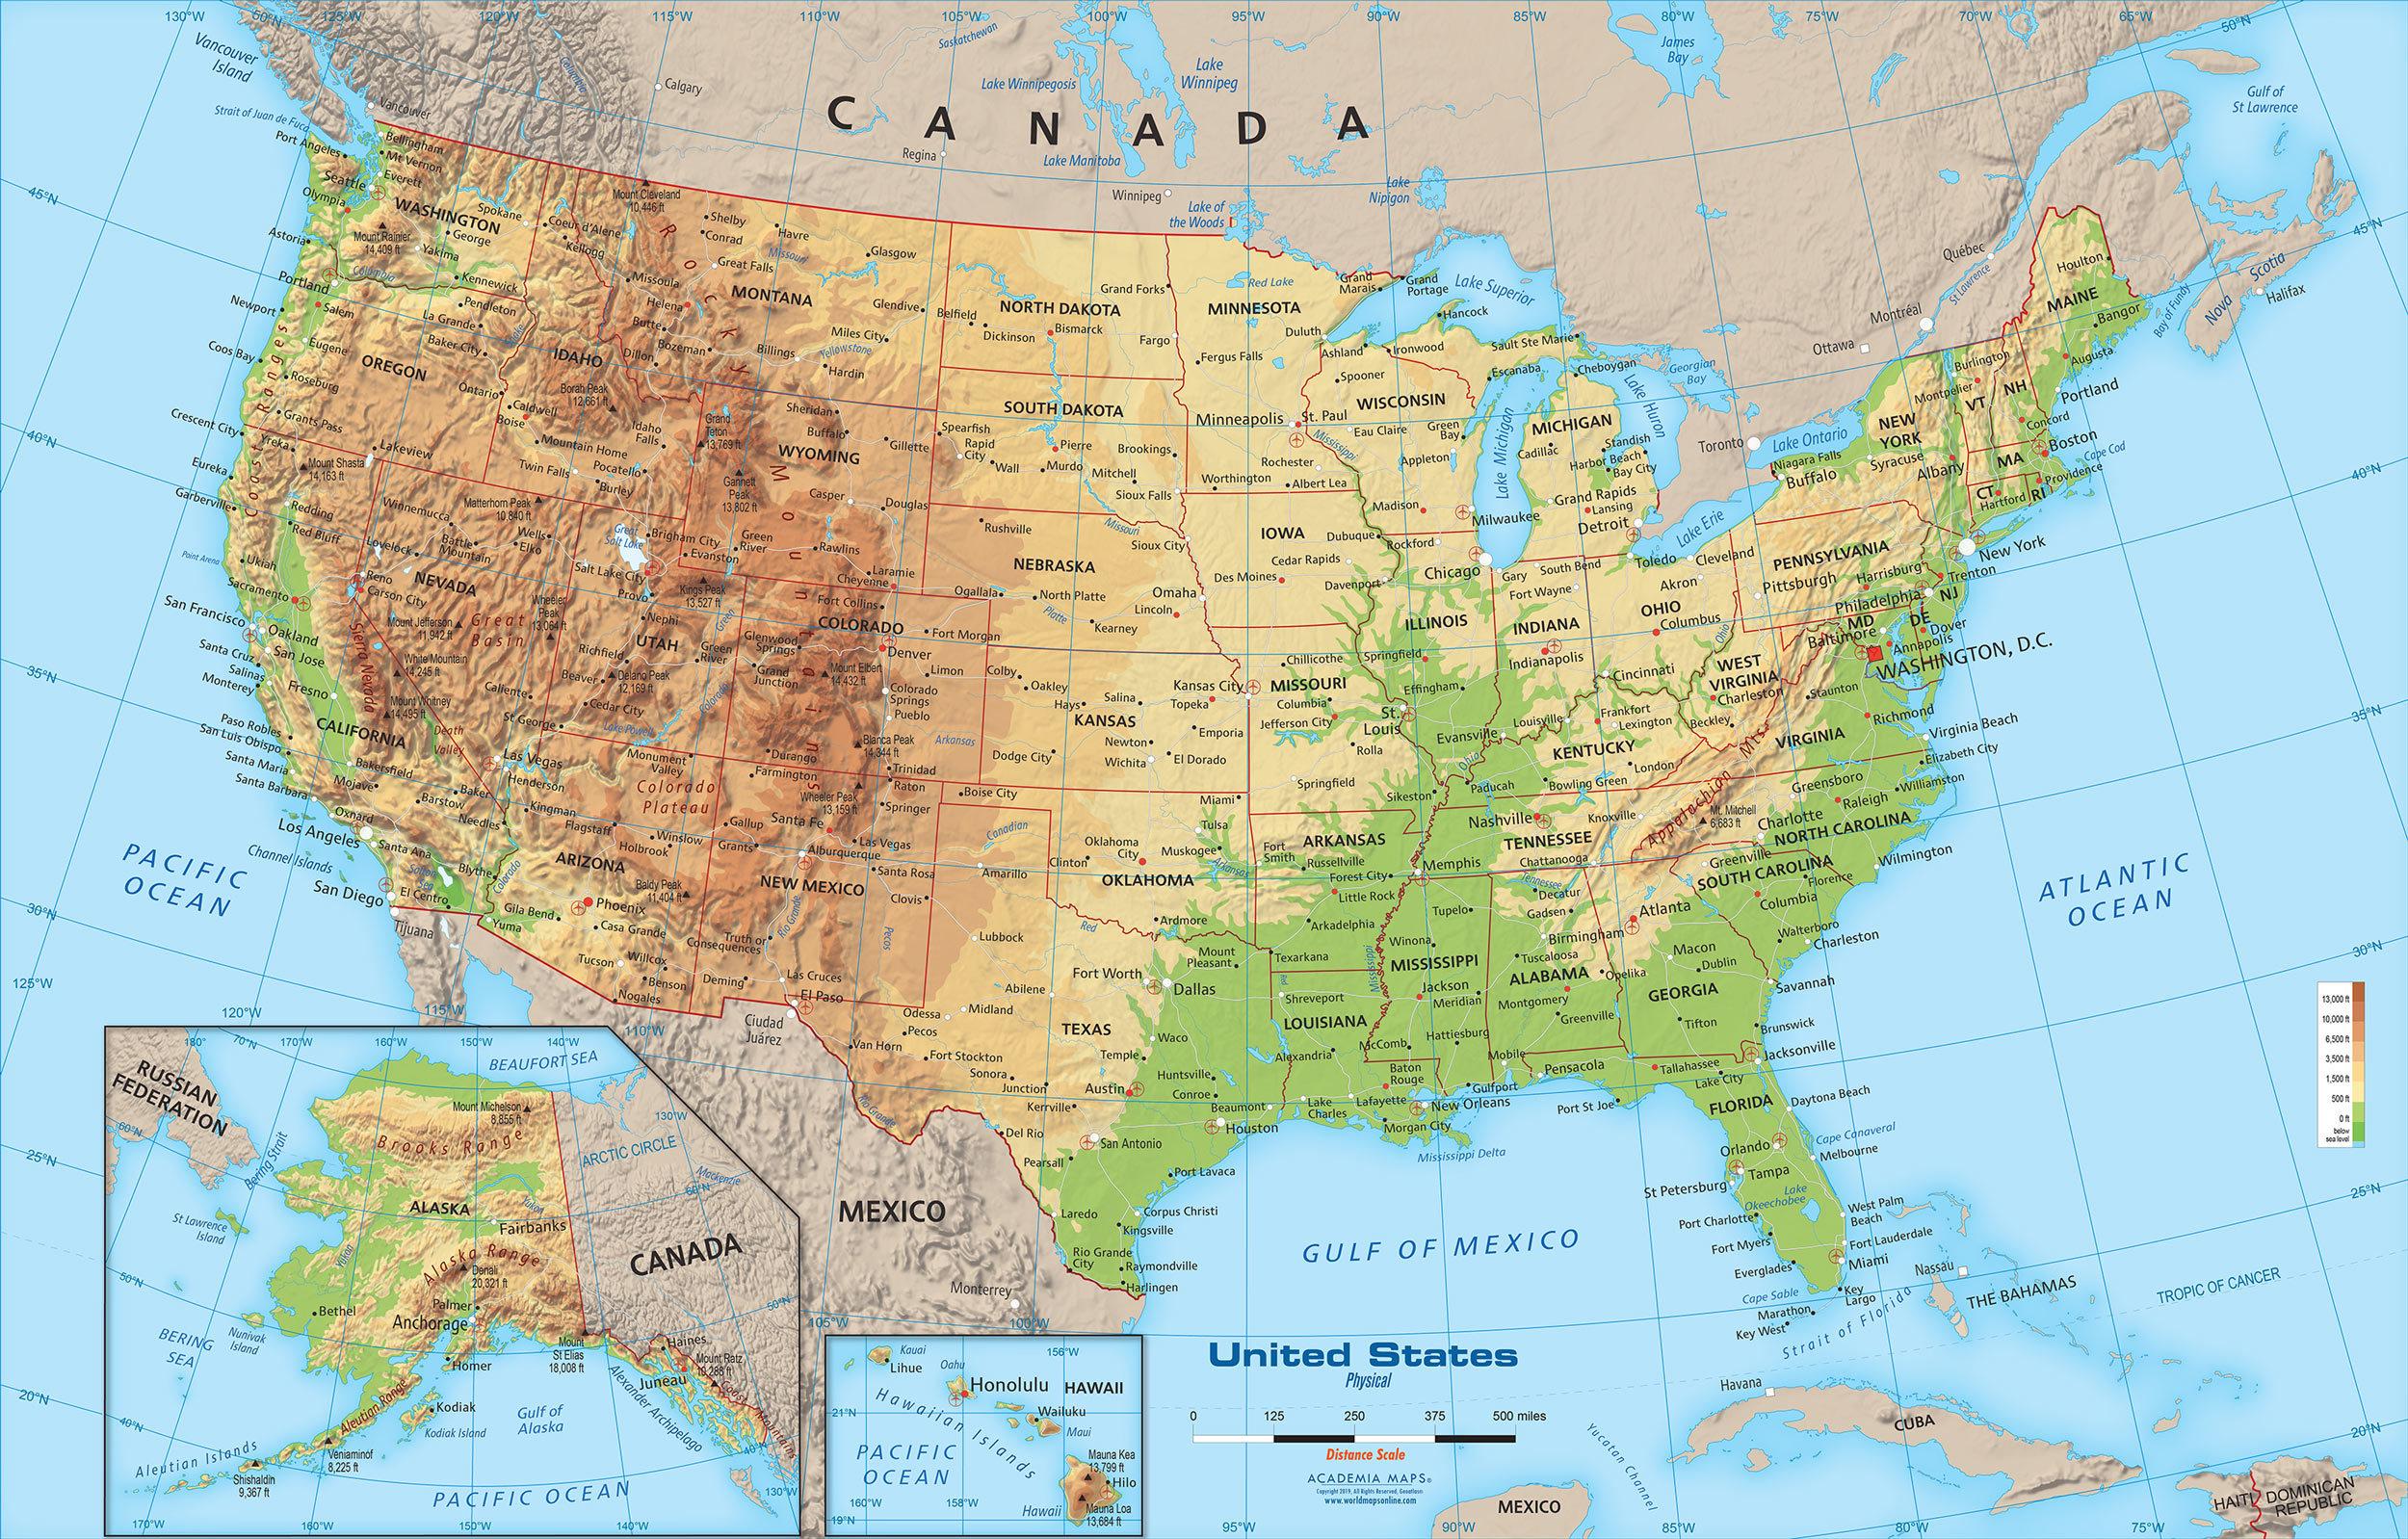 Geographical map of USA: topography and physical features of USA